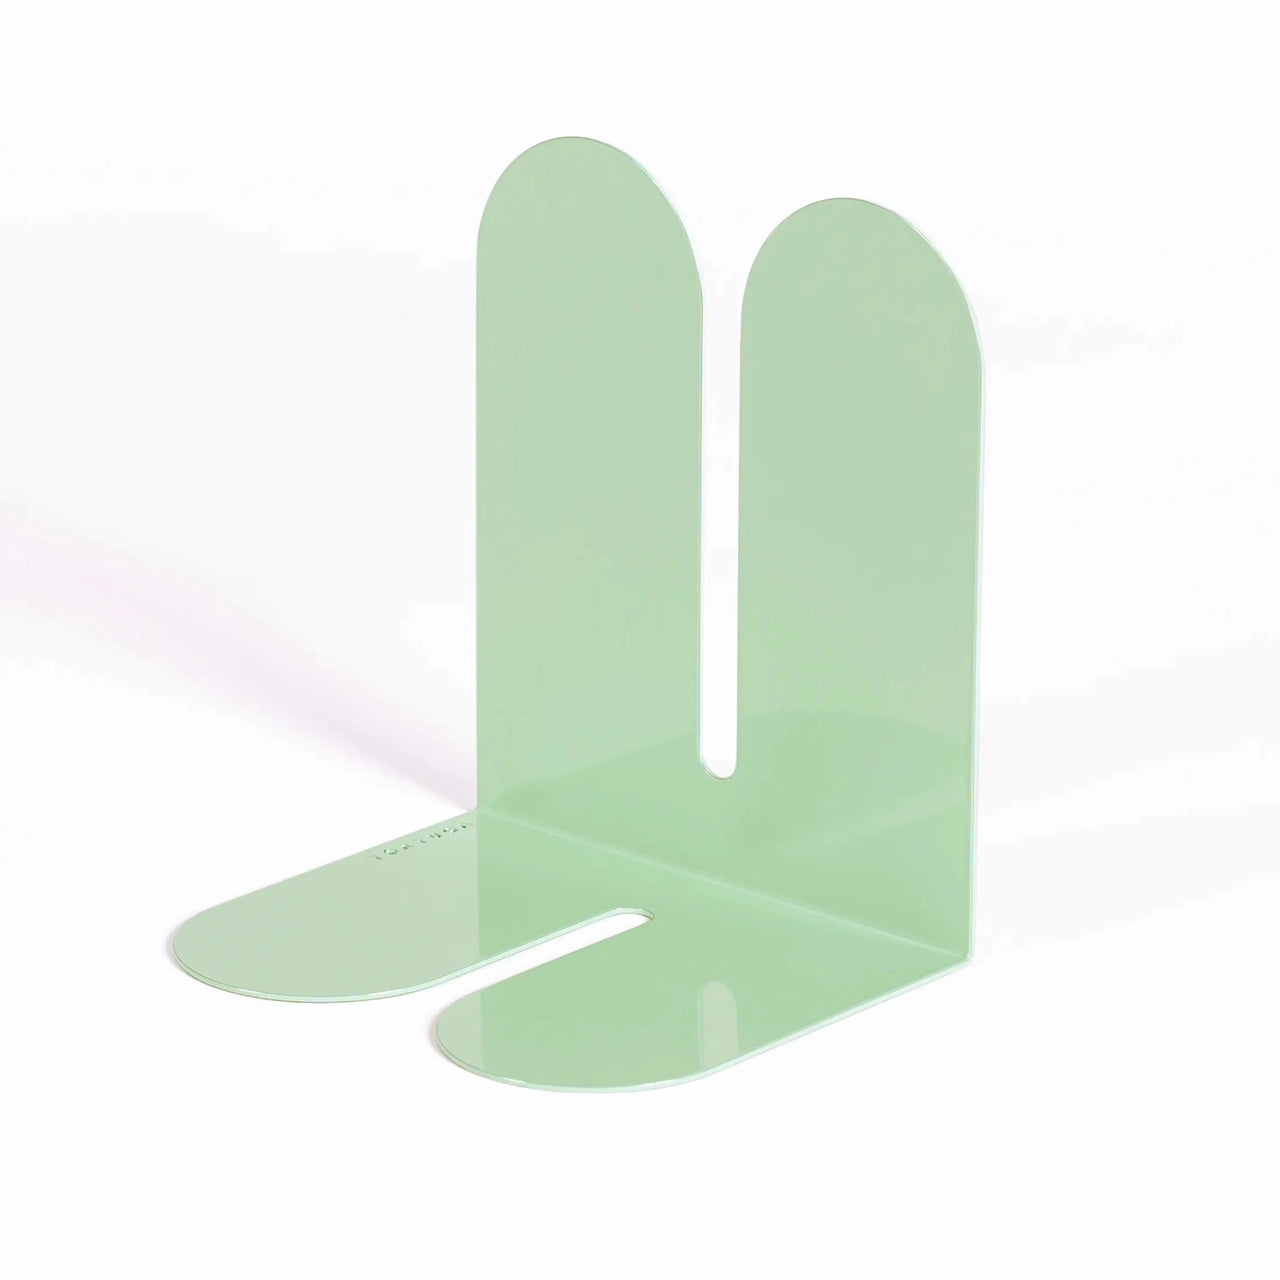 Cactus Bookend - Large